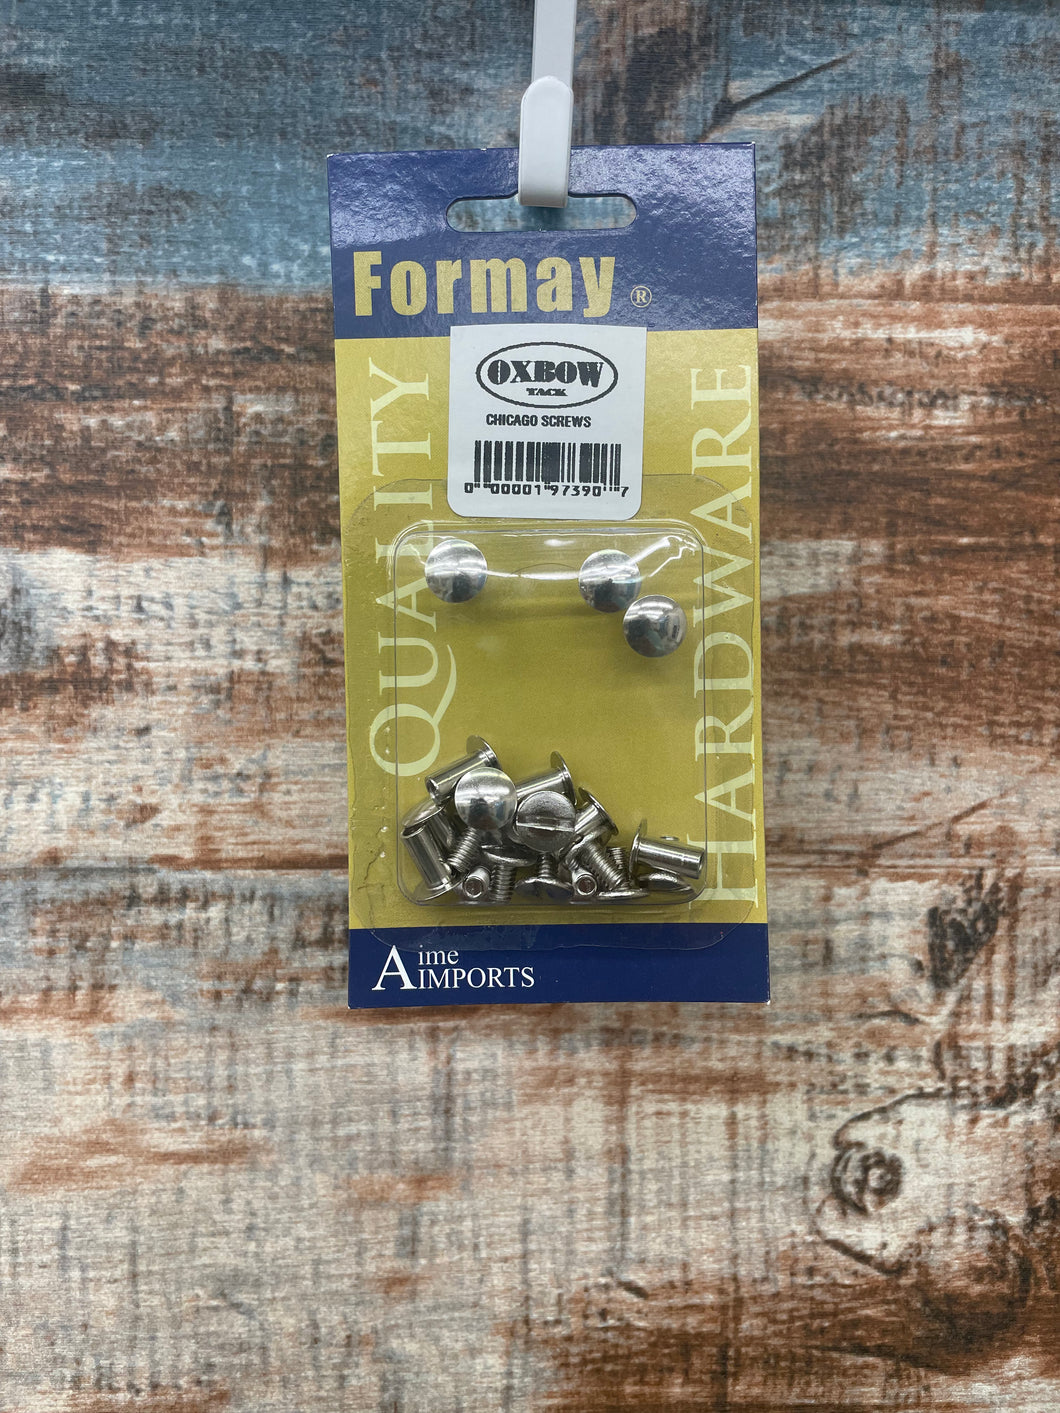 Package of Chicago Screws